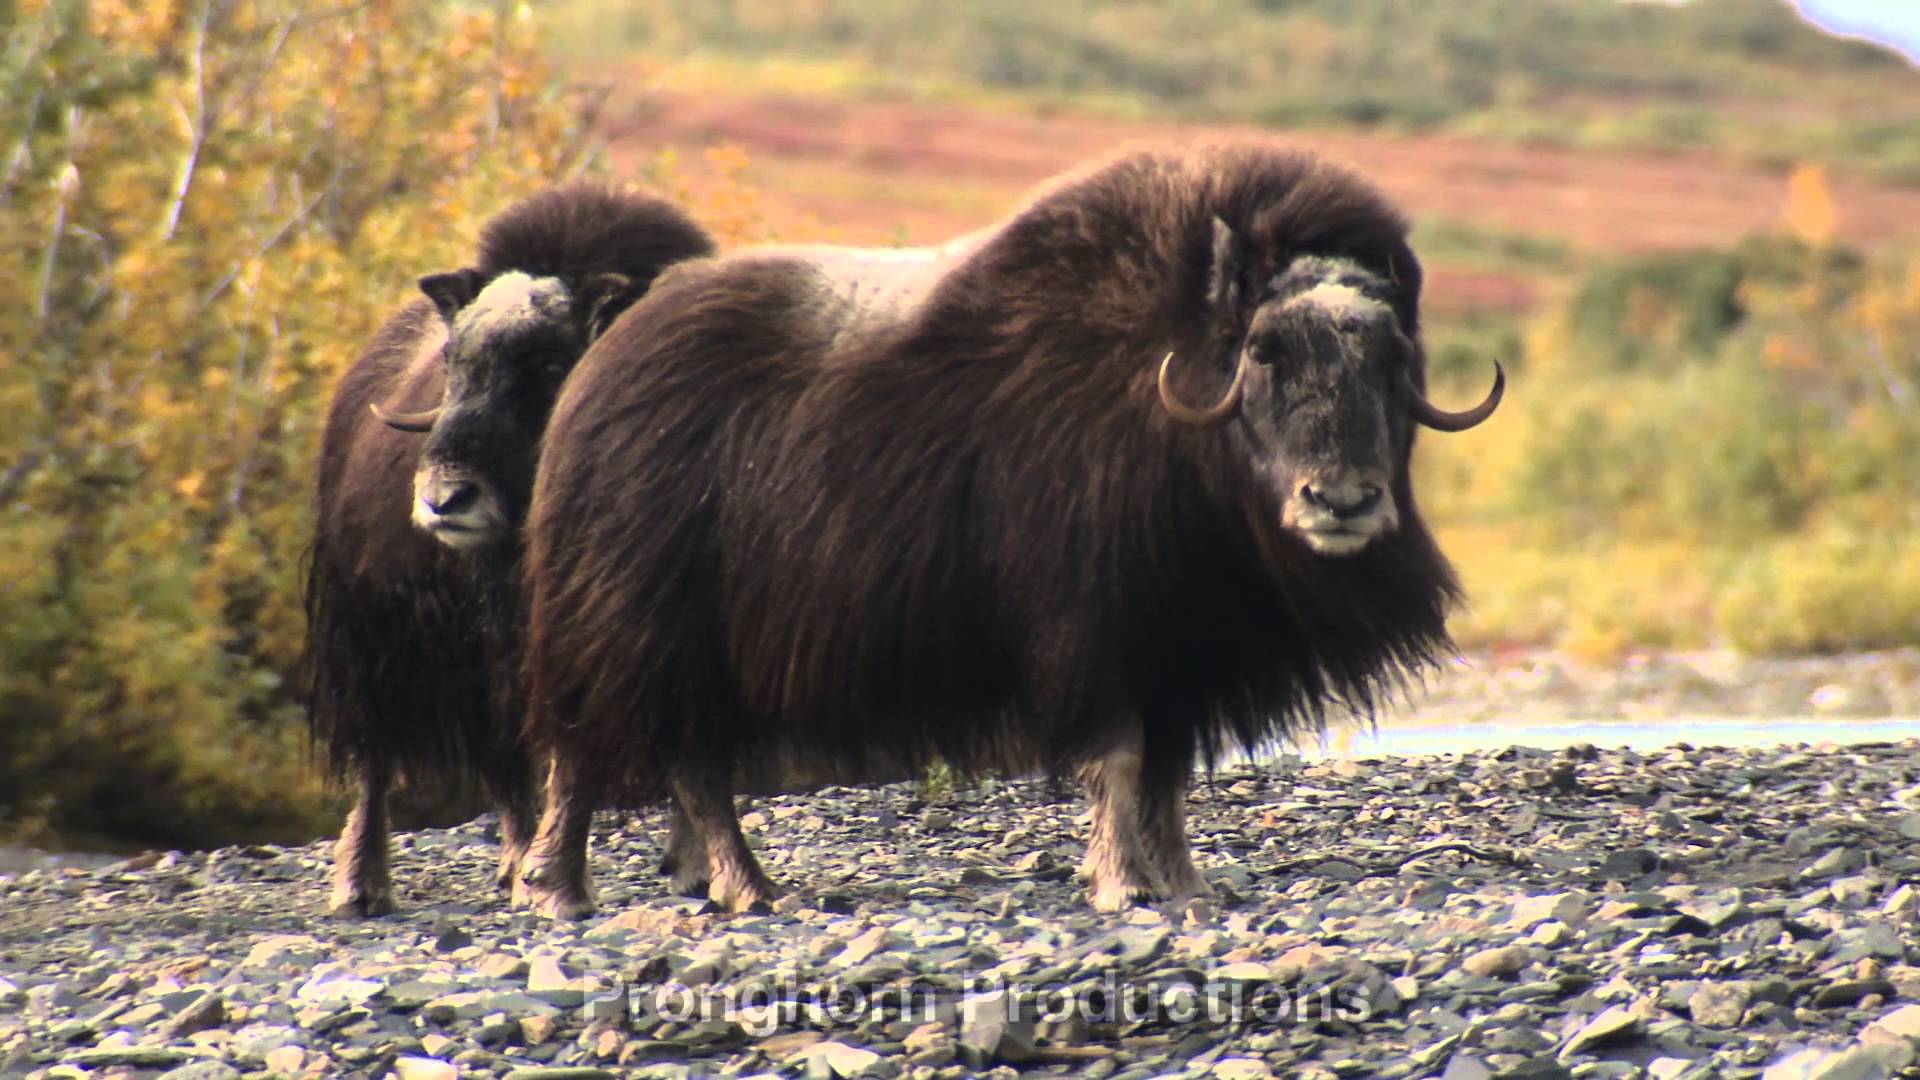 Musk Ox Video Footage - YouTube